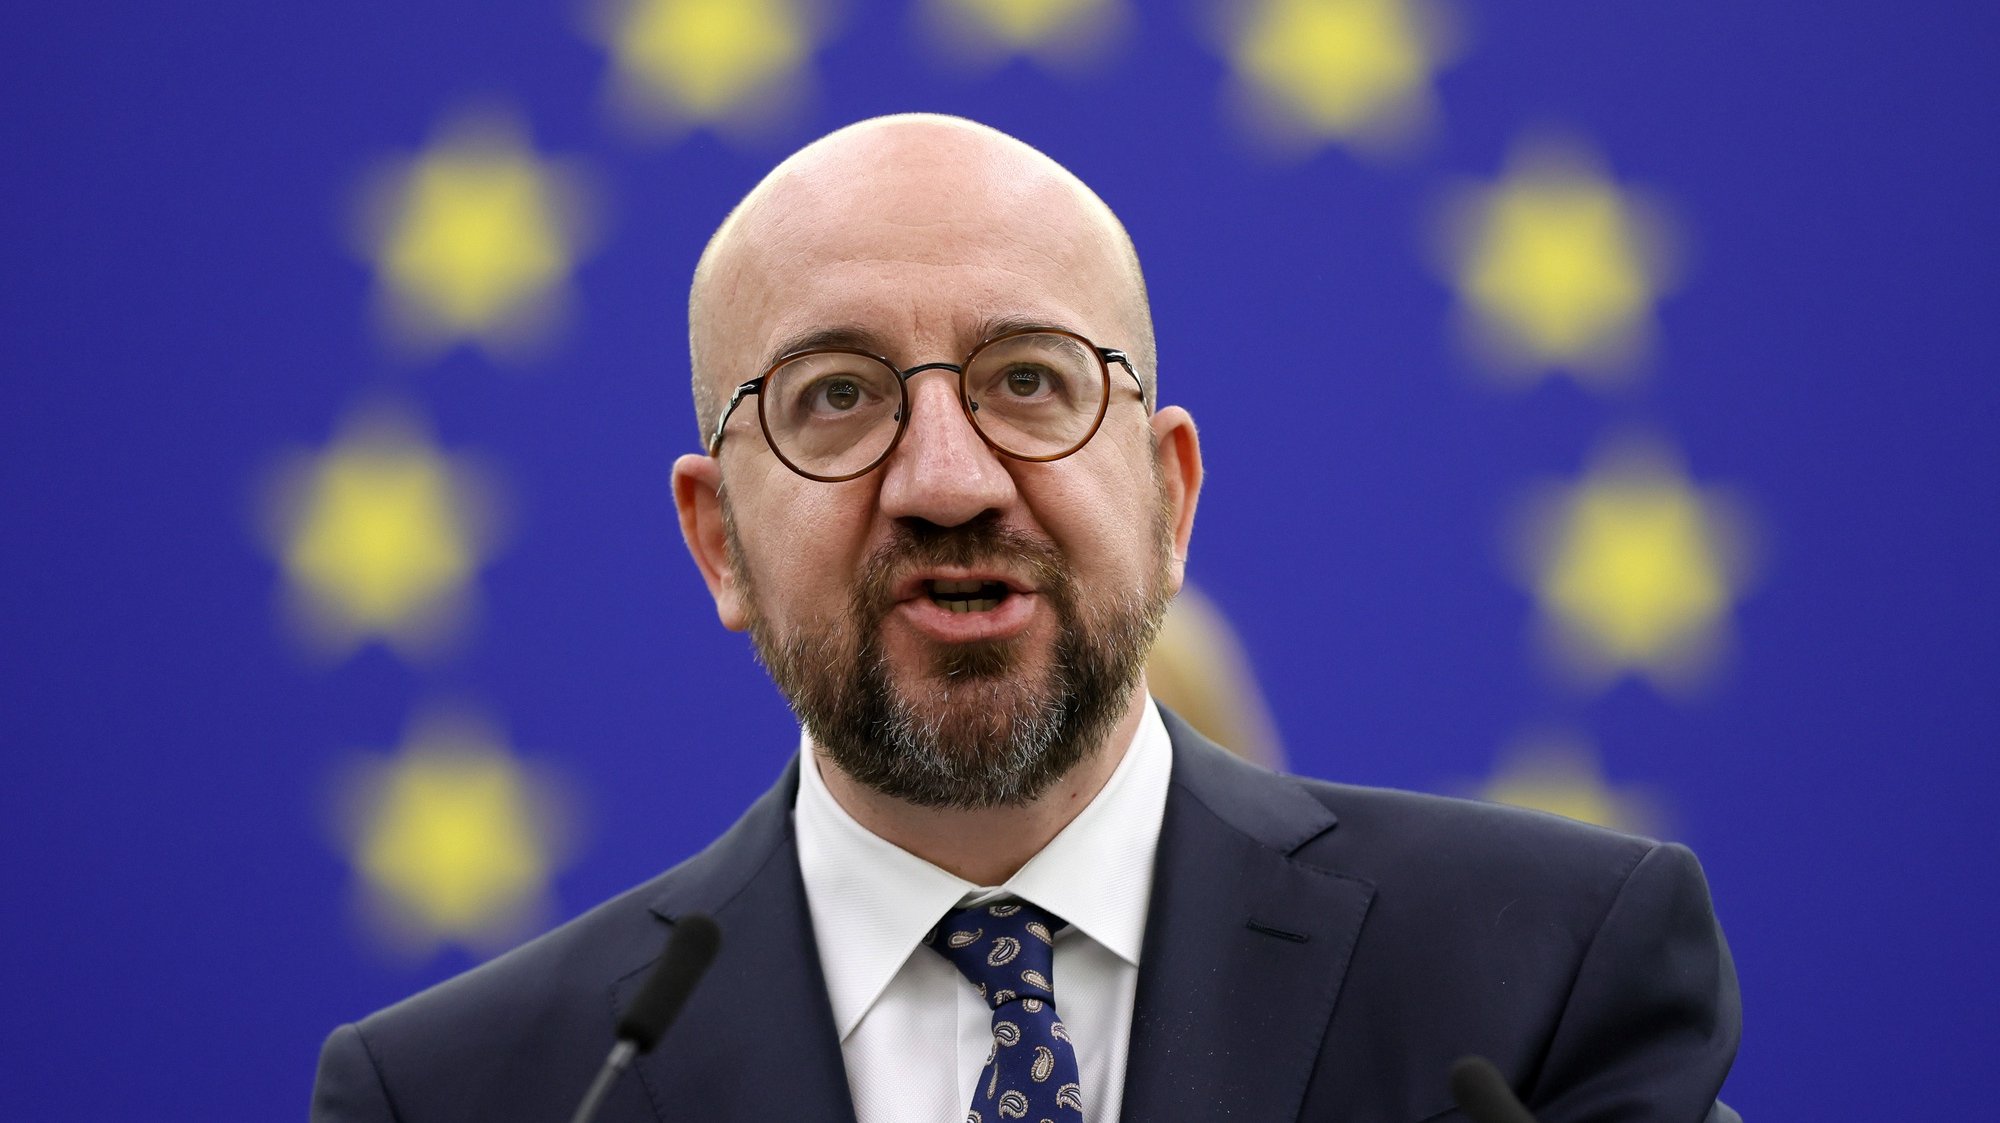 epa09873190 President of the European Council Charles Michel delivers a speech during a debate at the European Parliament in Strasbourg, France, 06 April 2022. The European Parliament on 06 April will review the results of the European Council held on 24 and 25 March, focusing on the latest developments of the war in Ukraine and the EU sanctions against Russia.  EPA/RONALD WITTEK